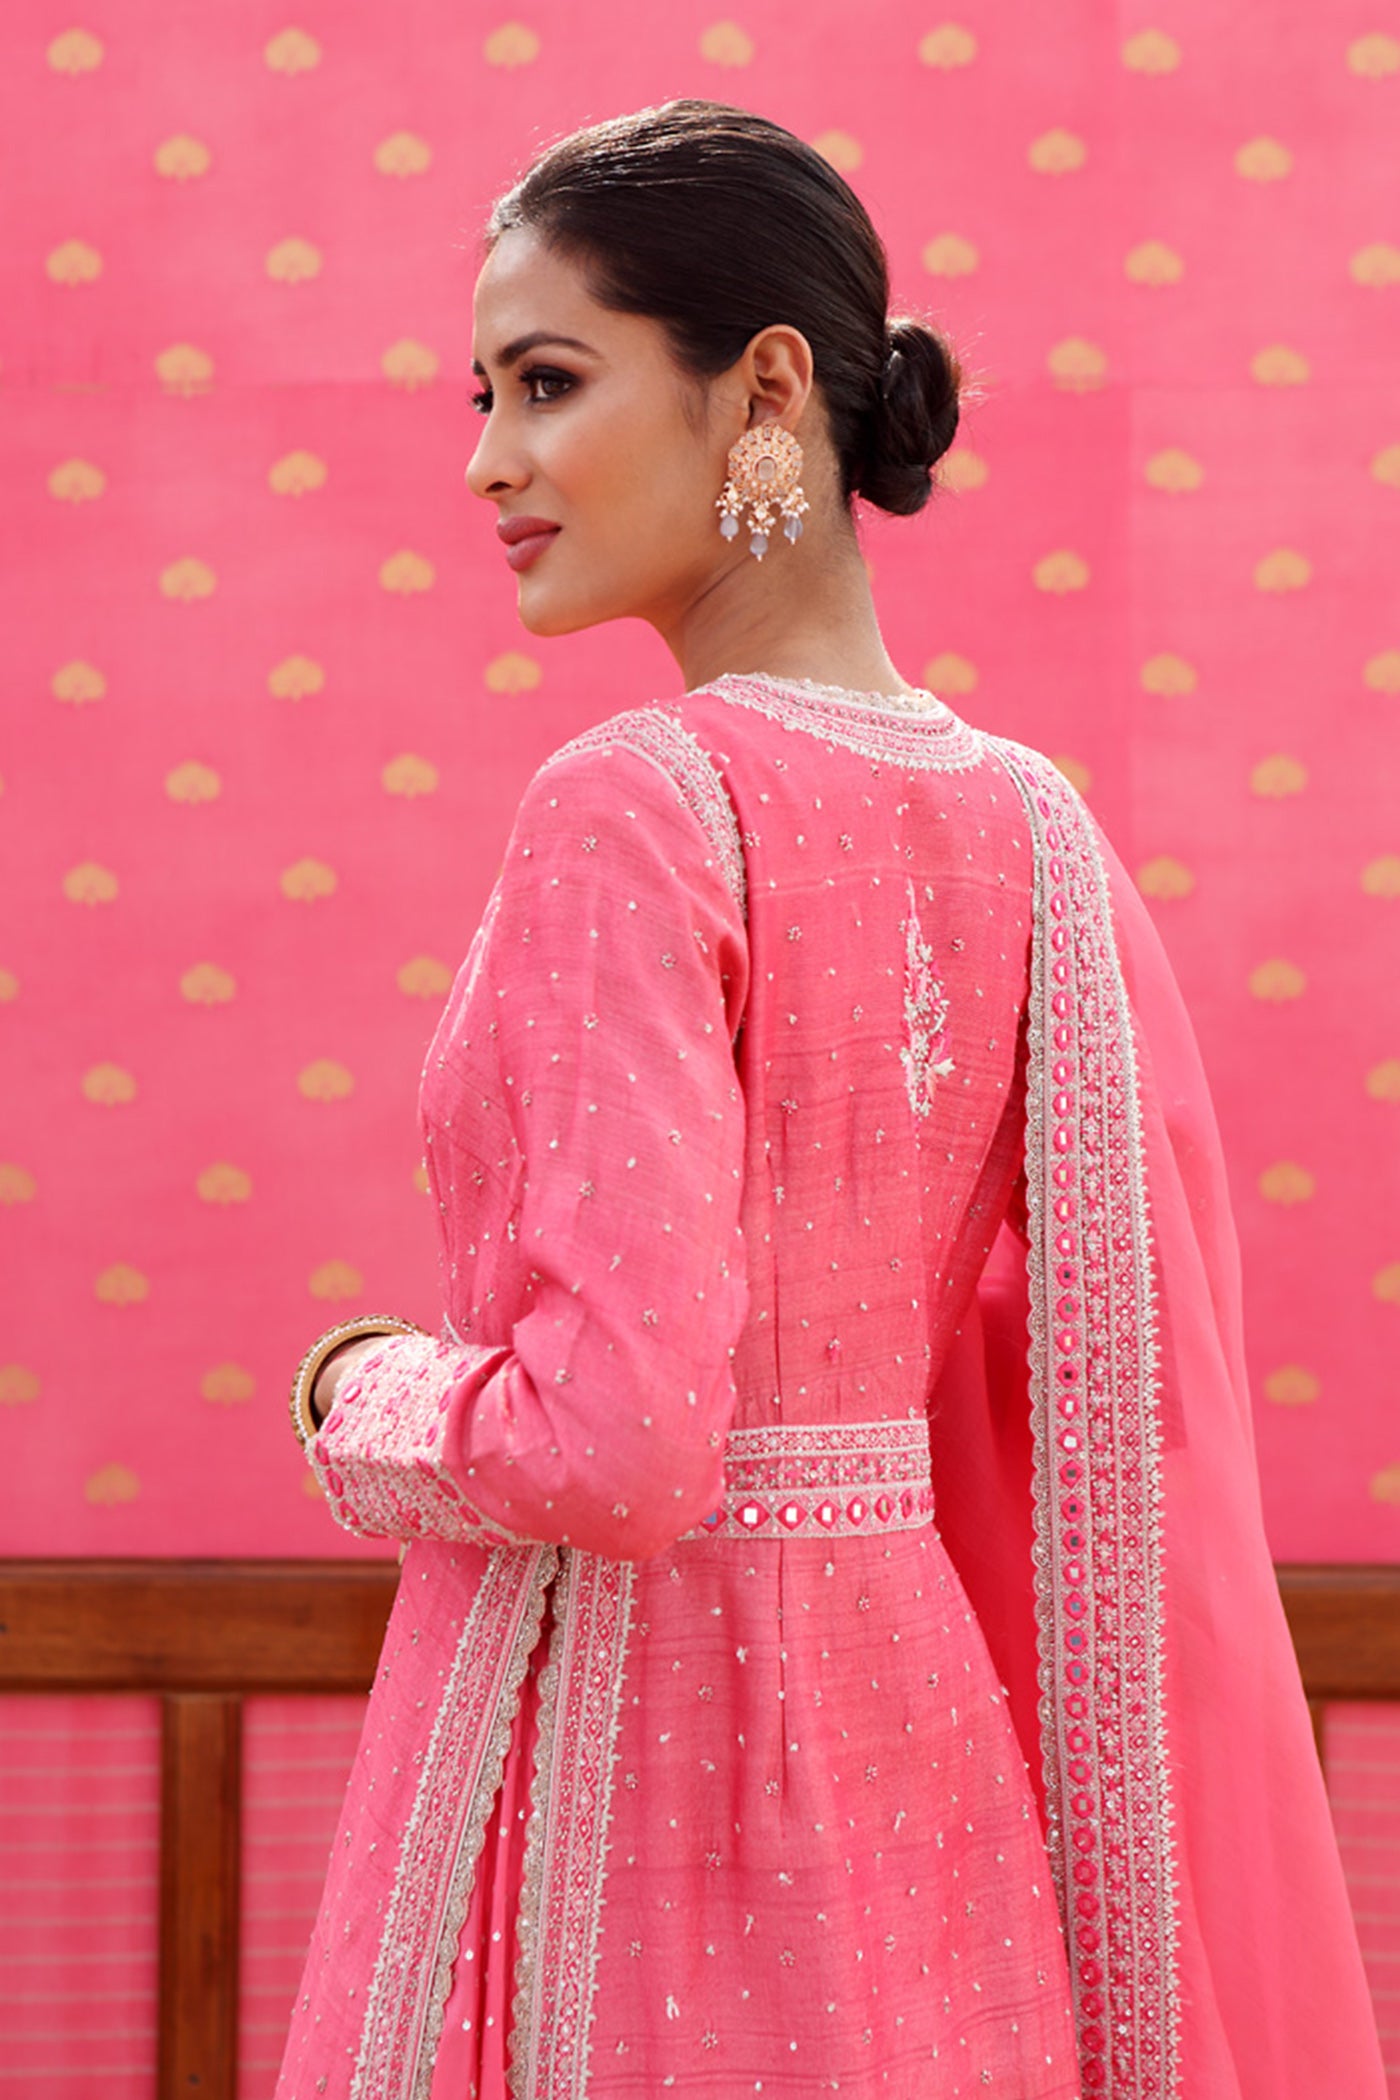 Hand-Embroidered Candy-Pink Jacket-Skirt Set